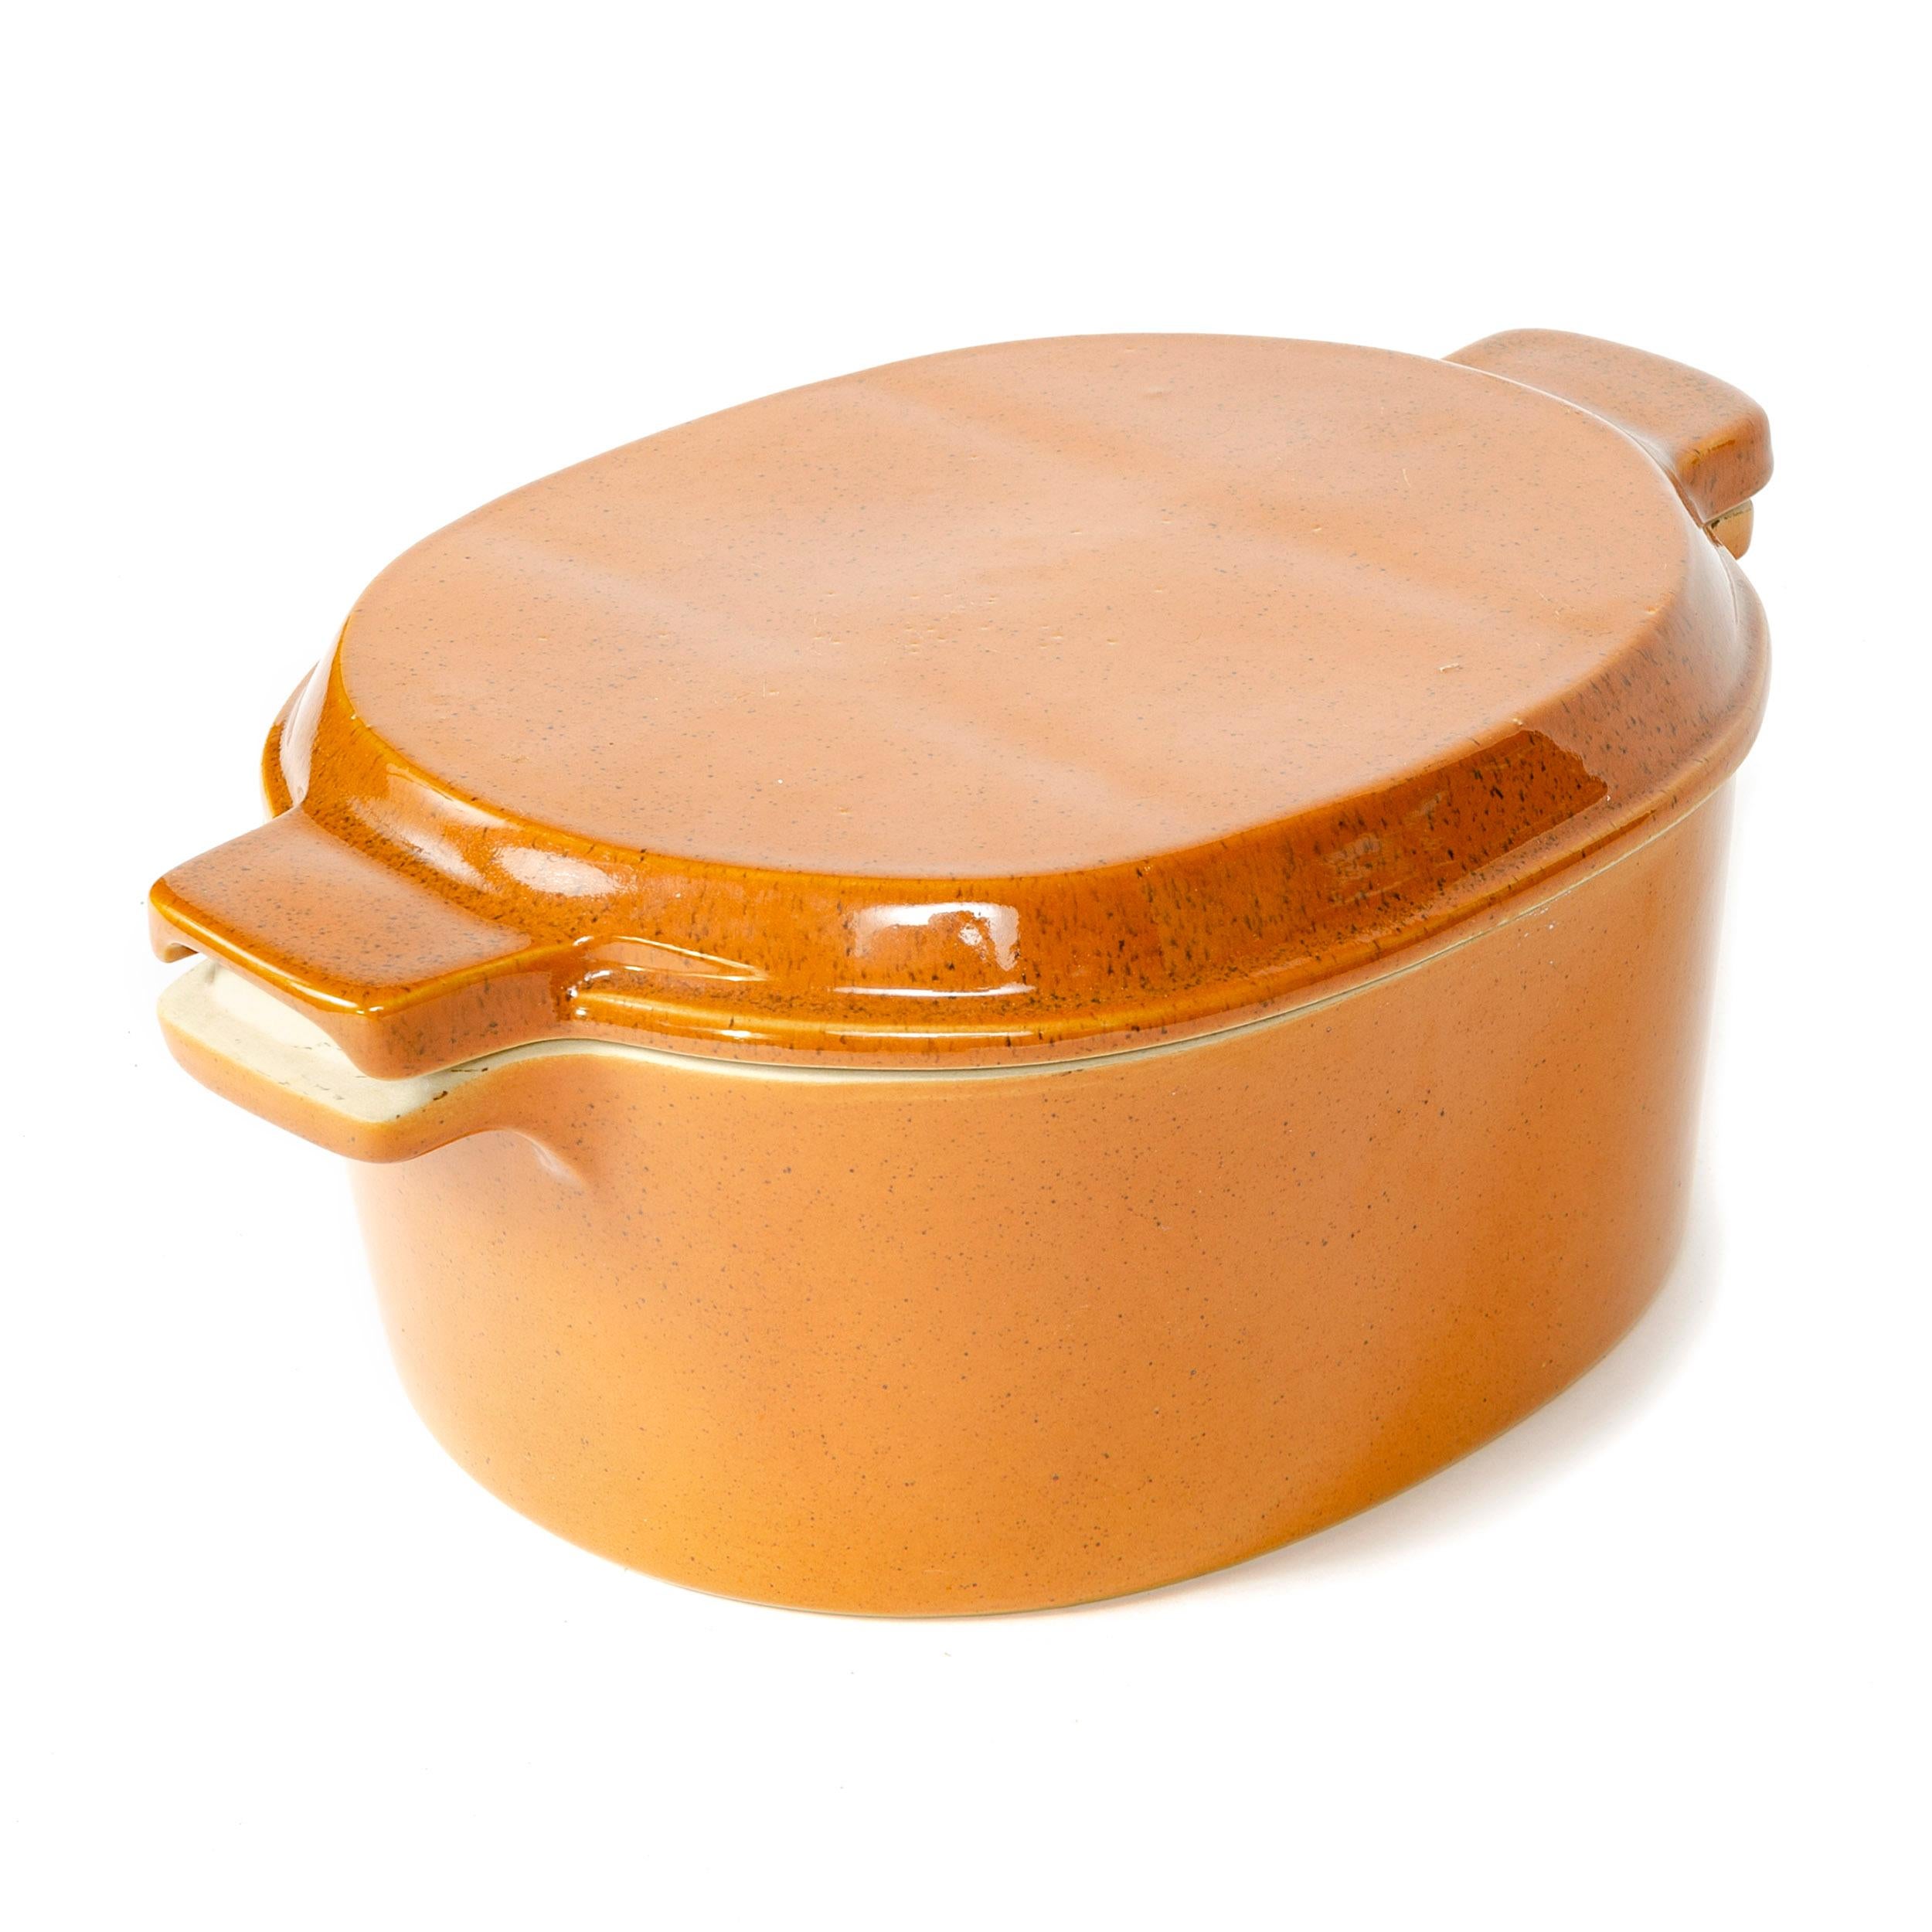 A substantial earthenware serving tureen with compartmentalized lid in a warm orange brown-flecked glossy glaze.